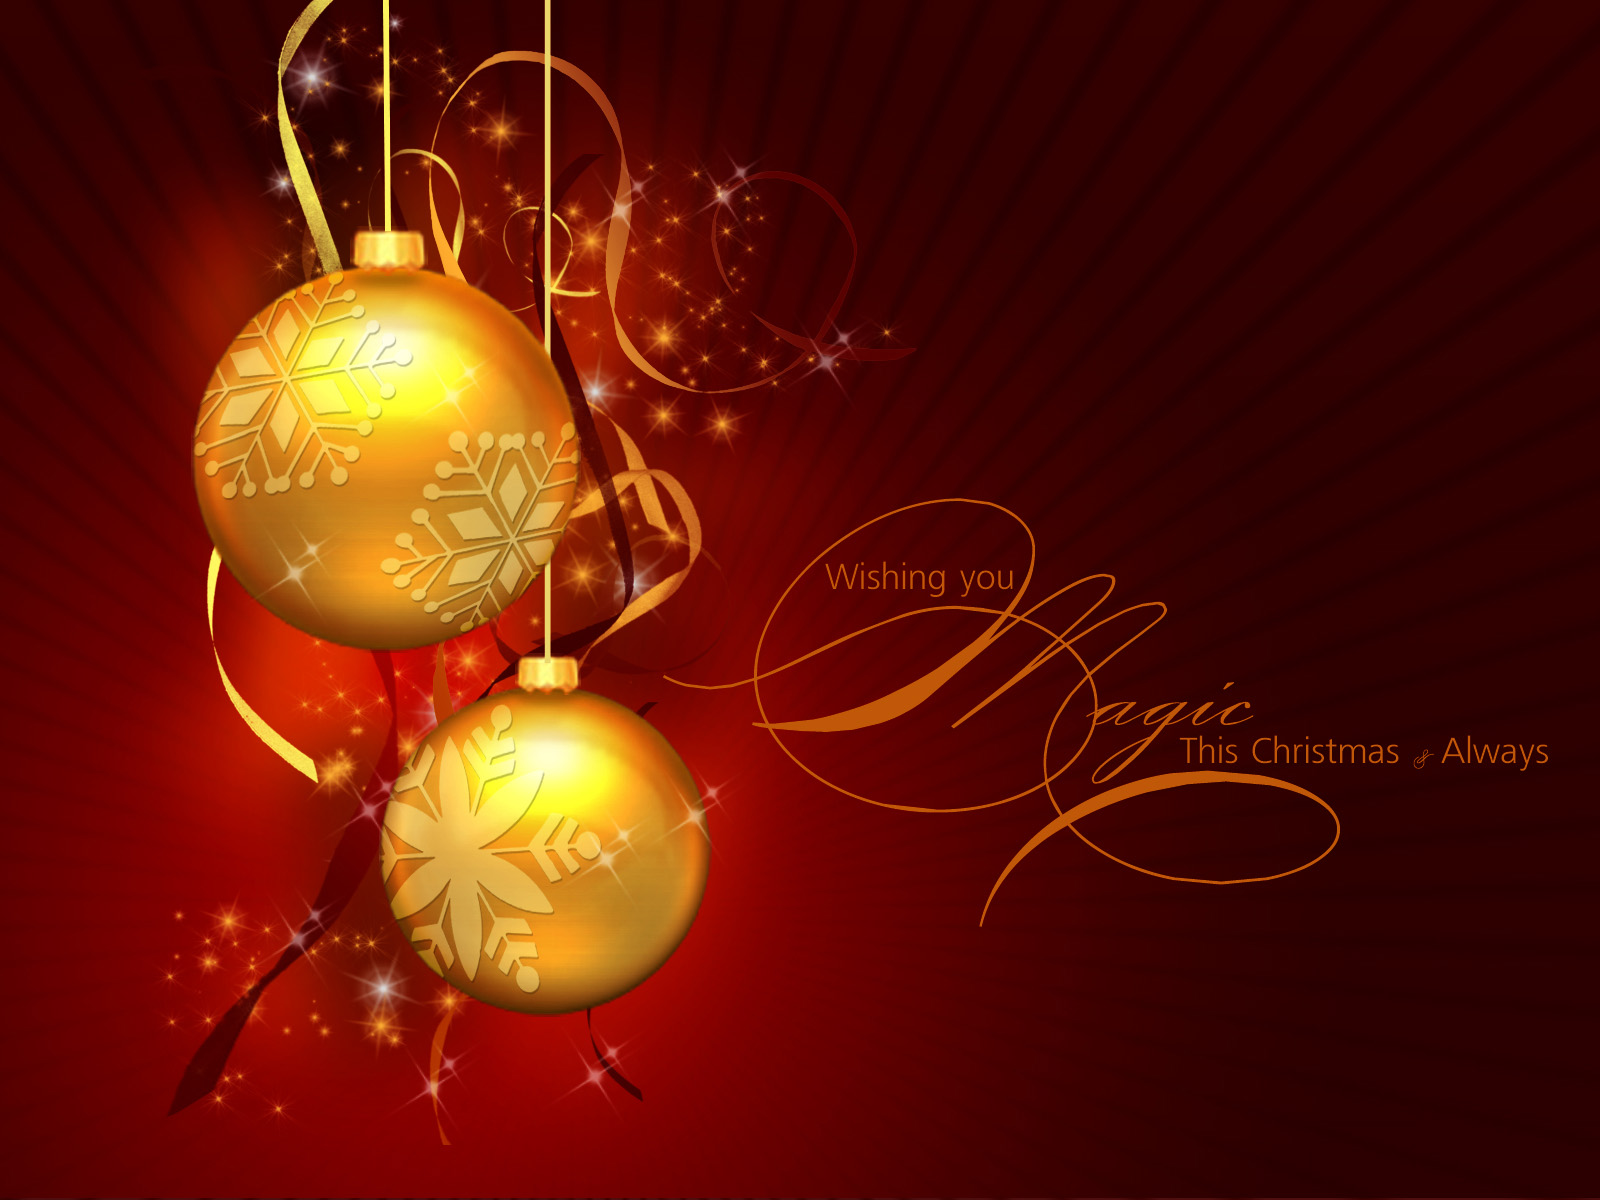 images of download christmas 2010 wallpaper pc wallpaper